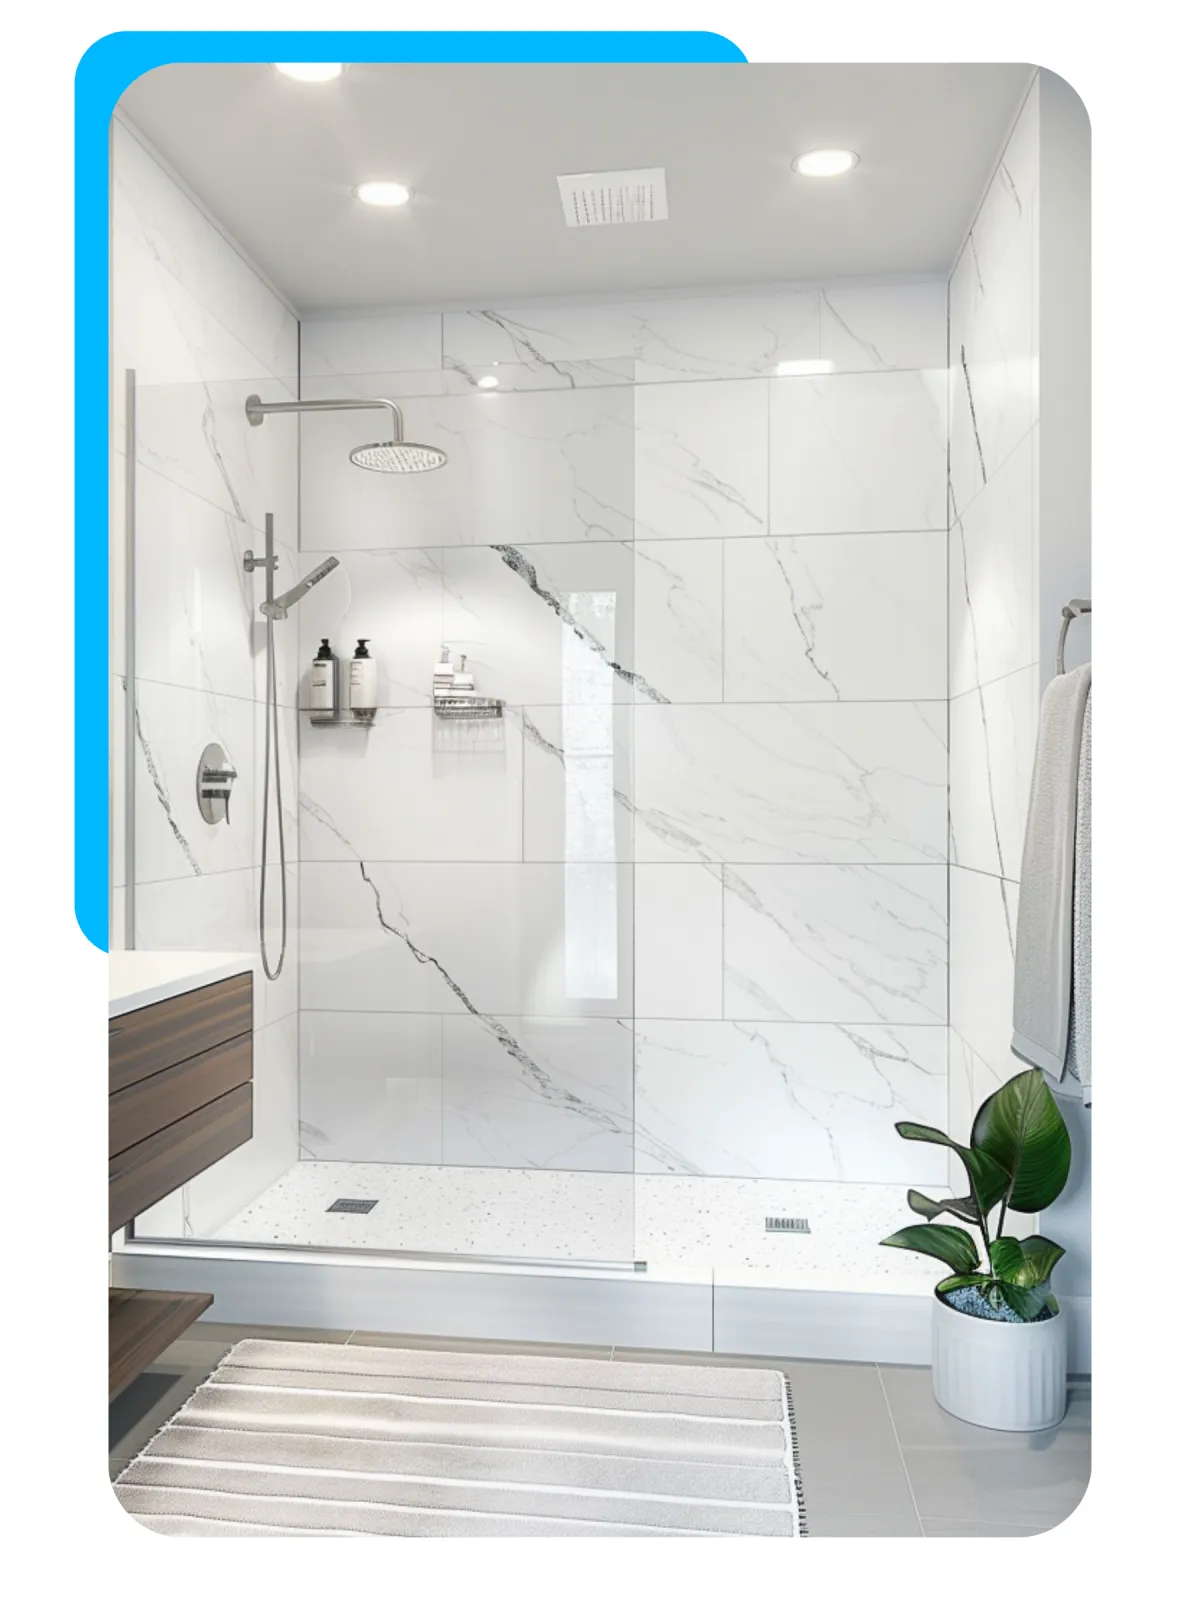 MVP's Walk-In Showers (Stylish or Accessible) are Elegant, Modern, & Safe for All